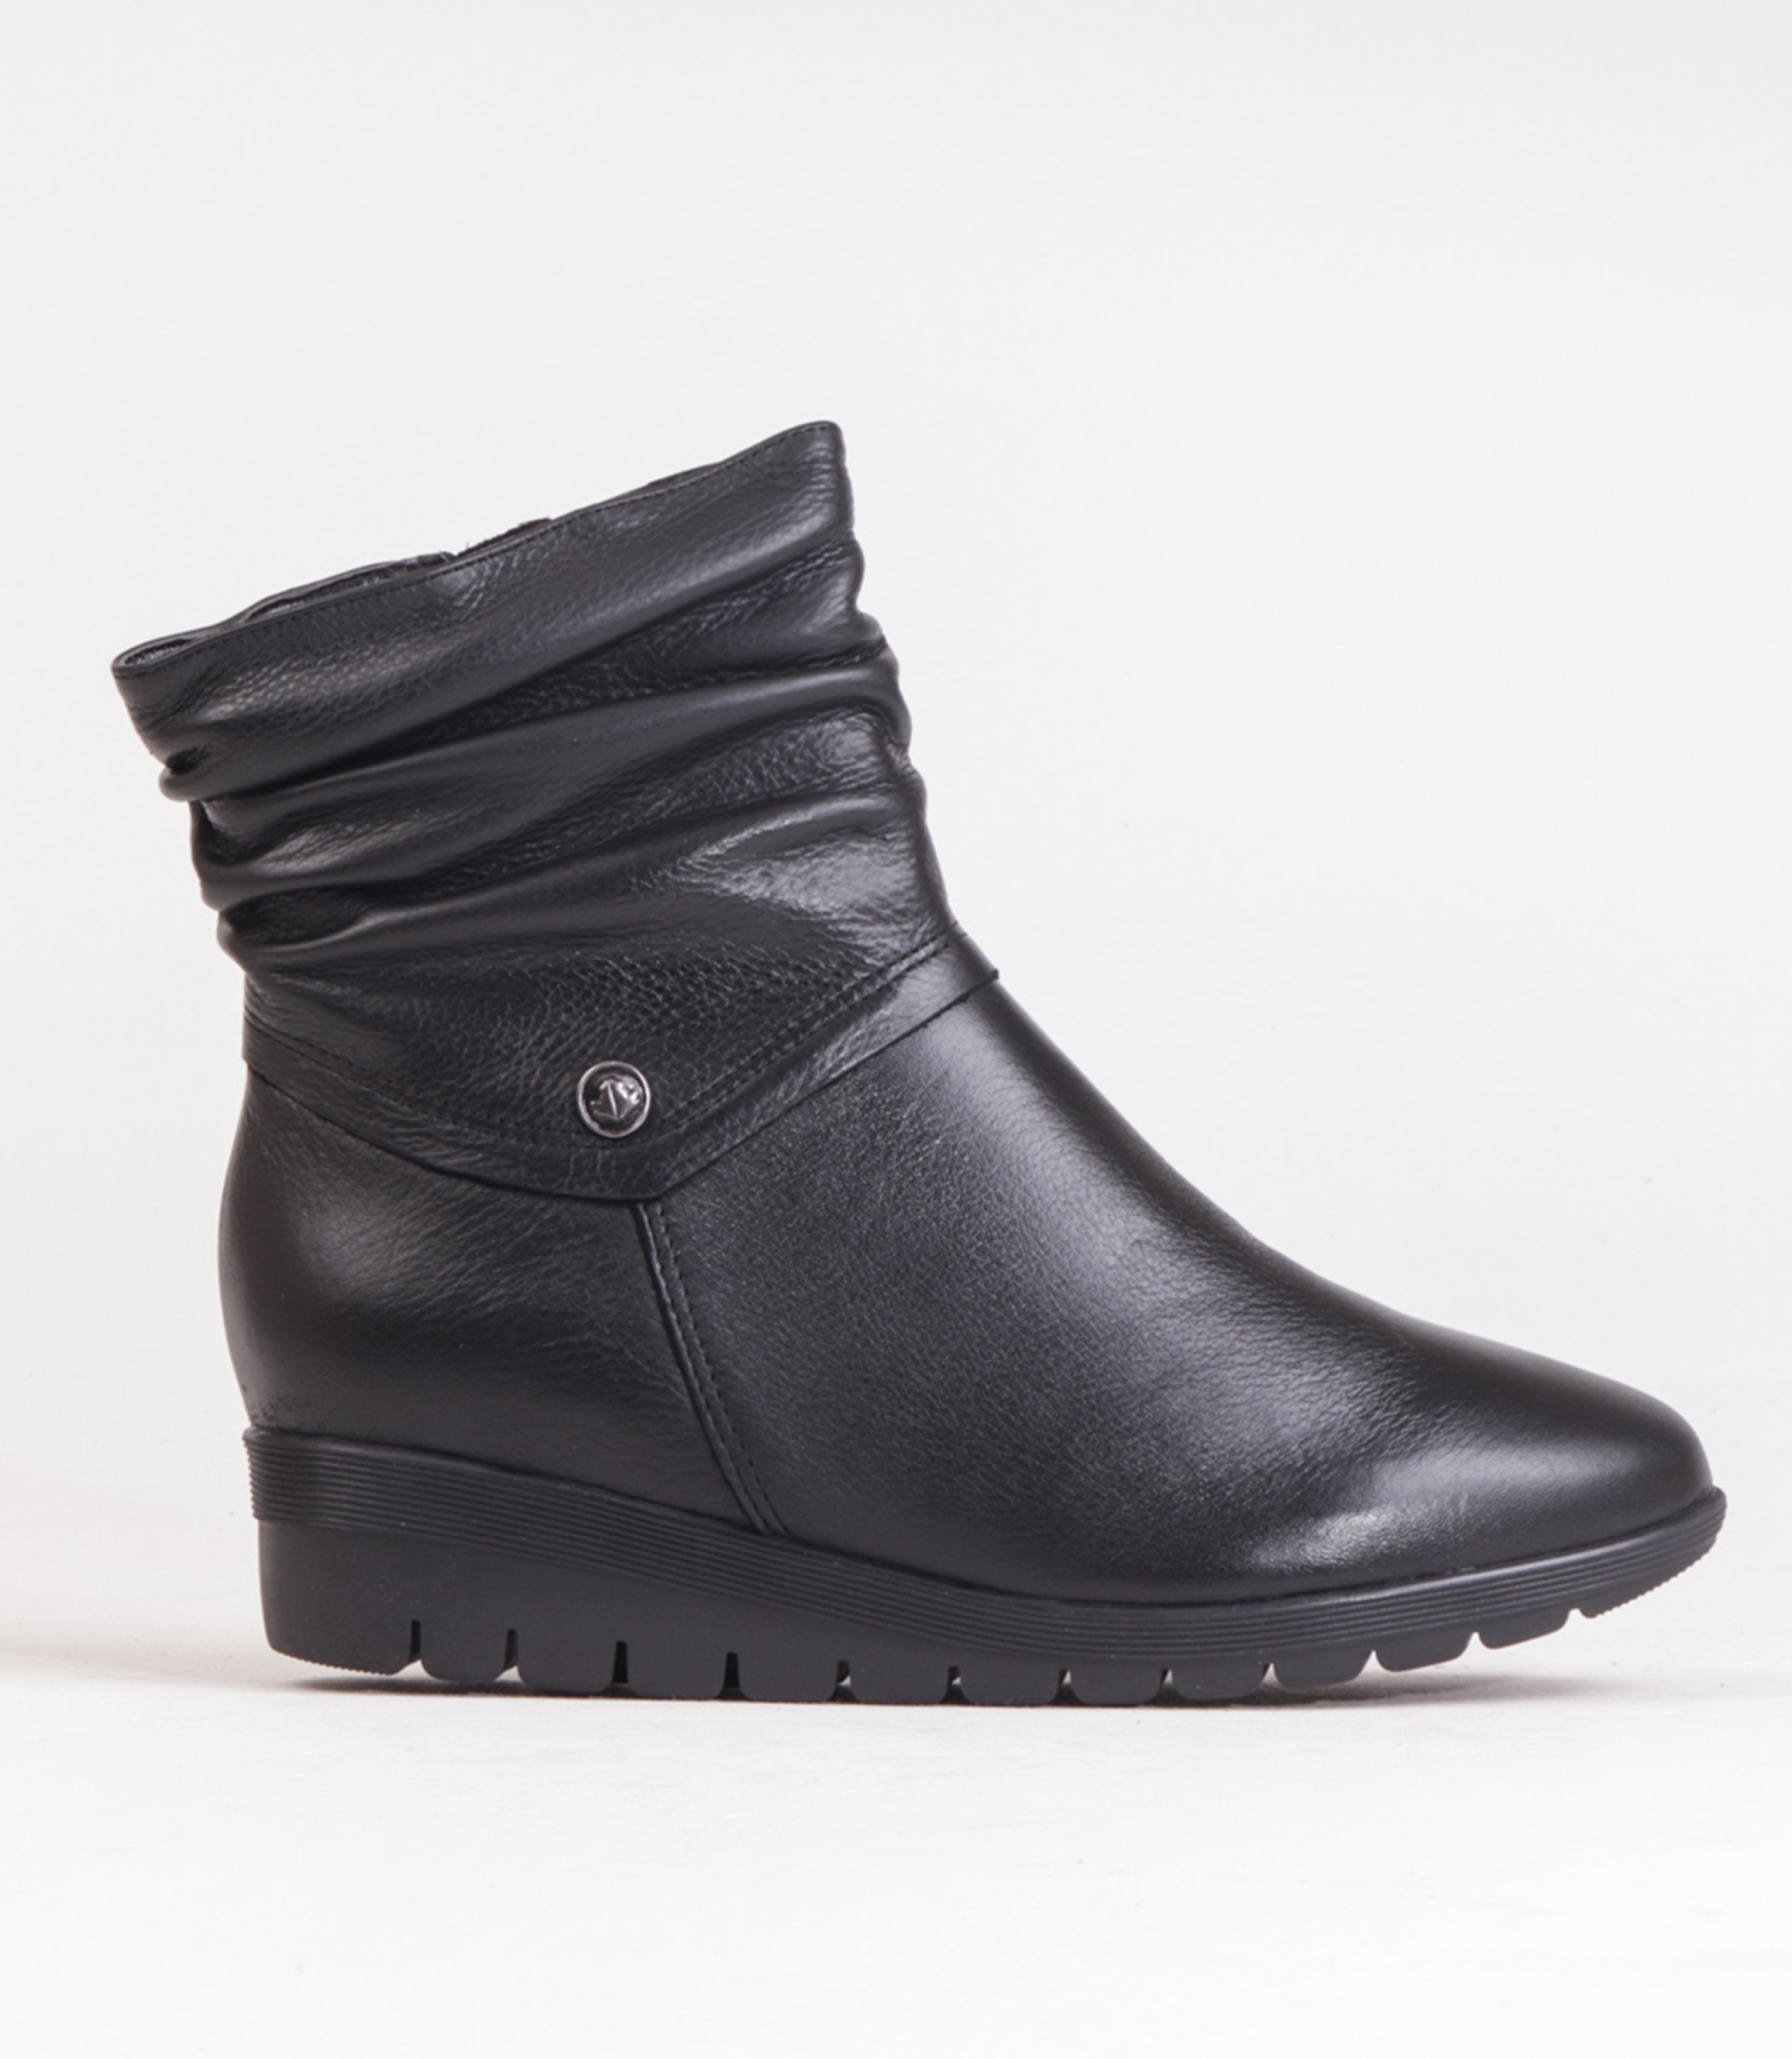 FROGGIE BLACK LEATHER RUCHED ANKLE BOOT | Rosella - Style inspired by ...